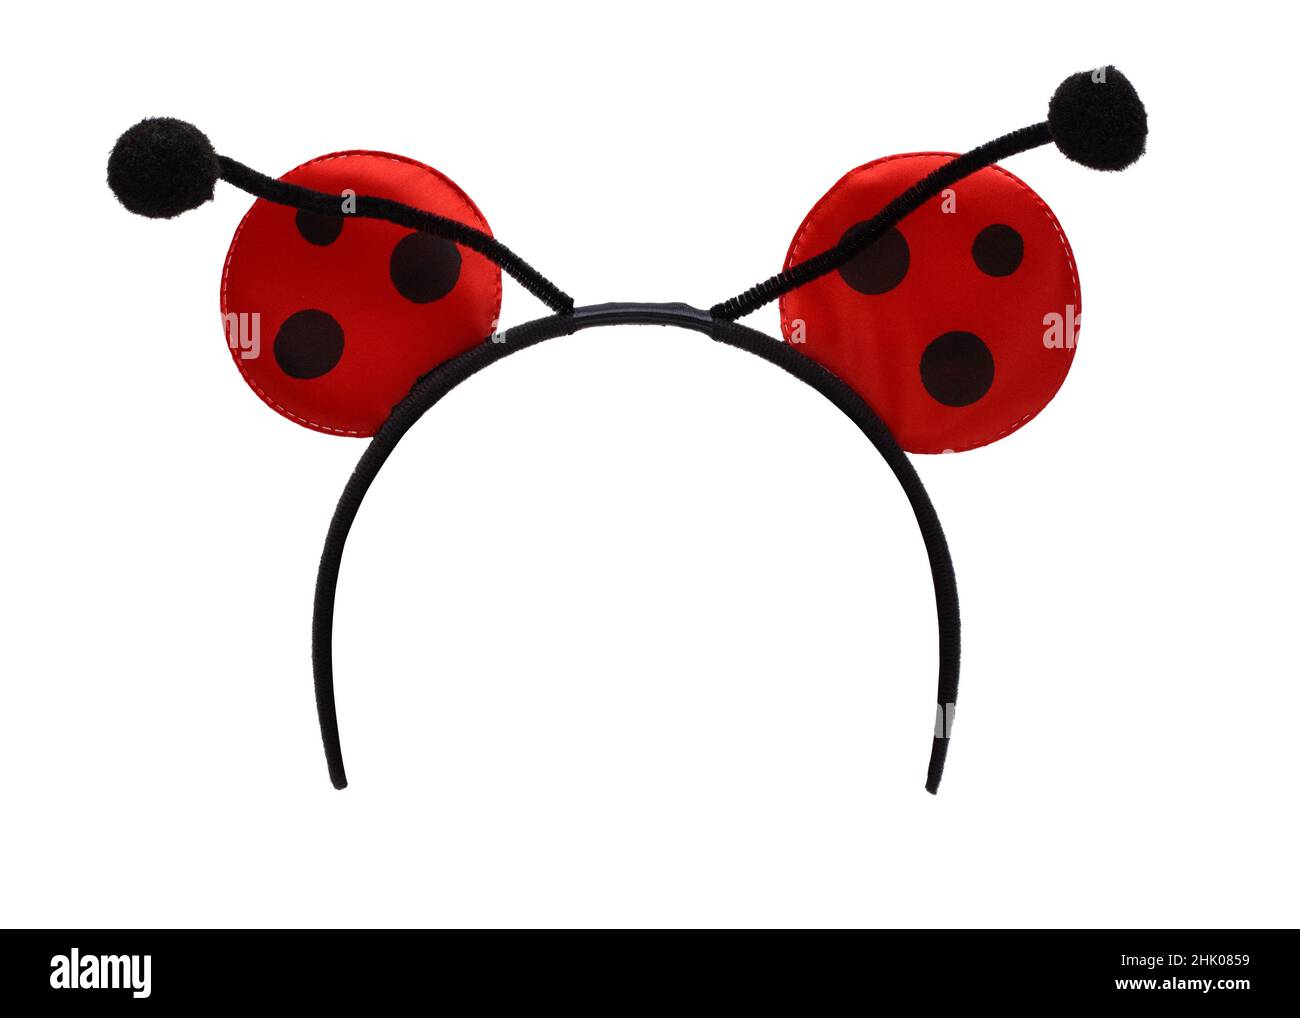 Lady Bug Headband Costume Ears Cut out on White. Foto Stock